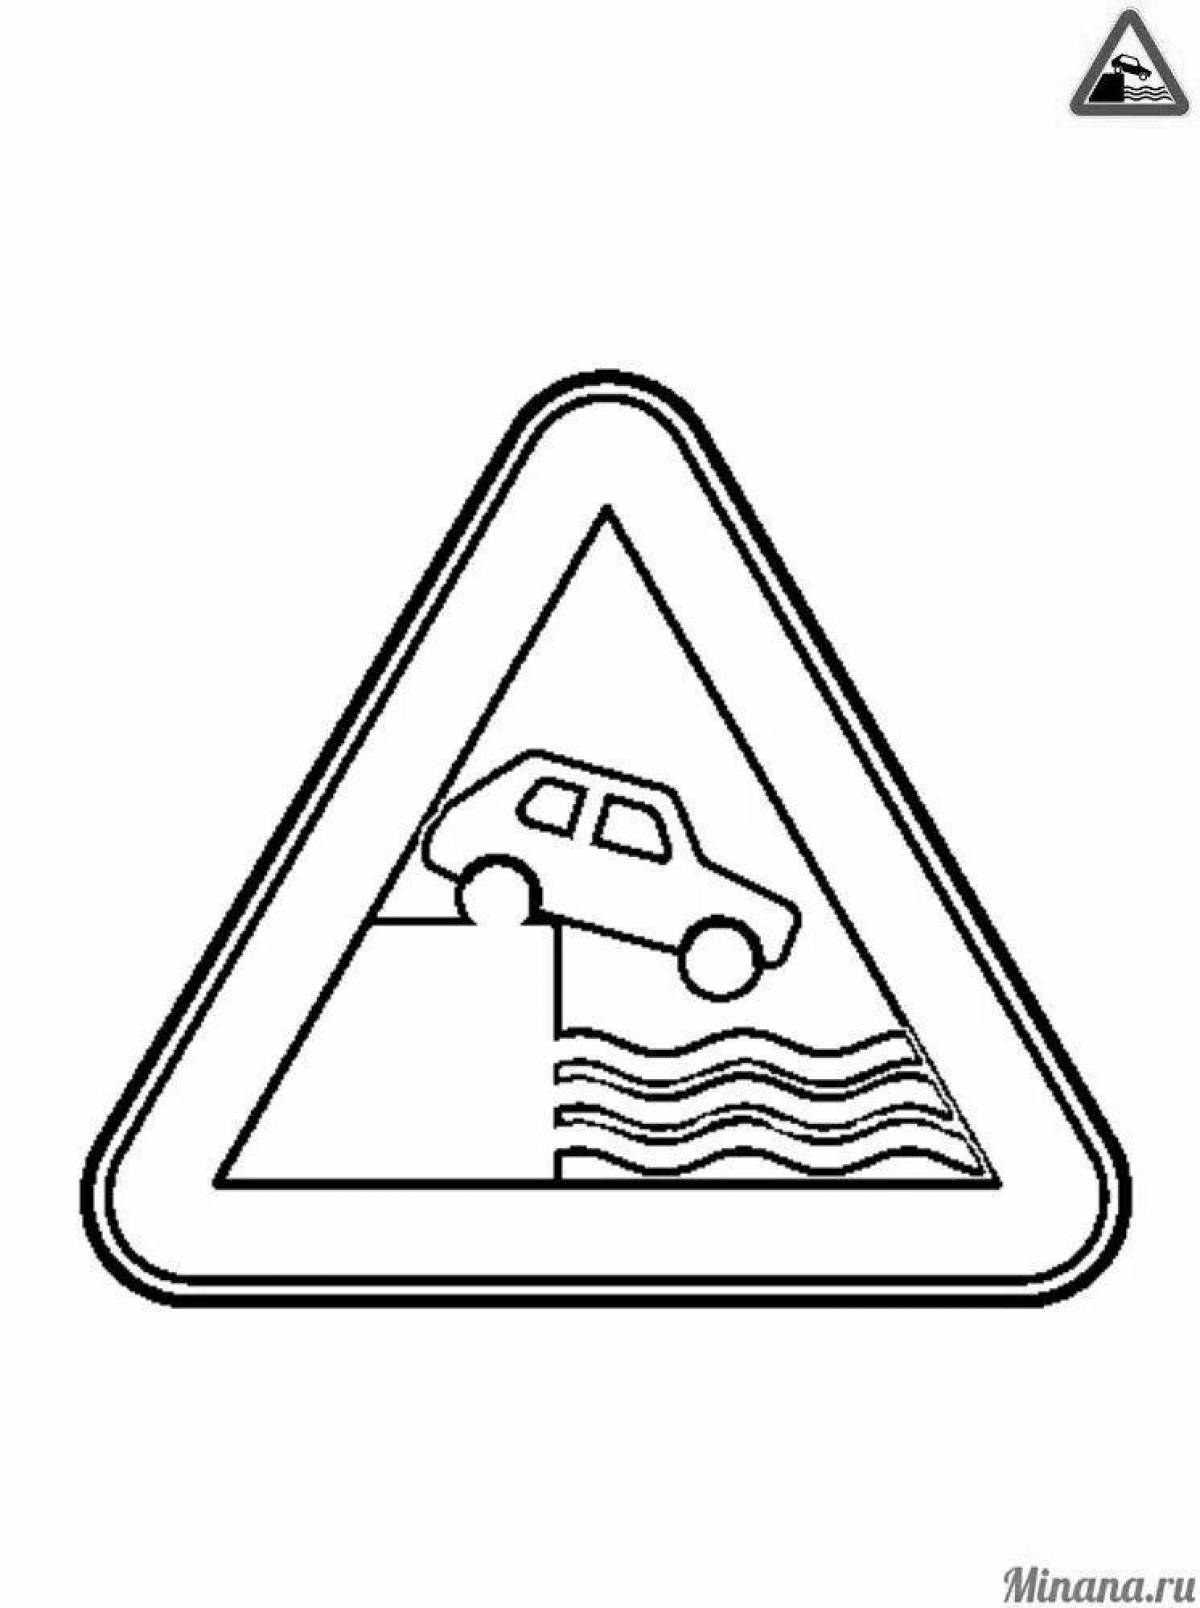 Coloring page with dynamic warning sign